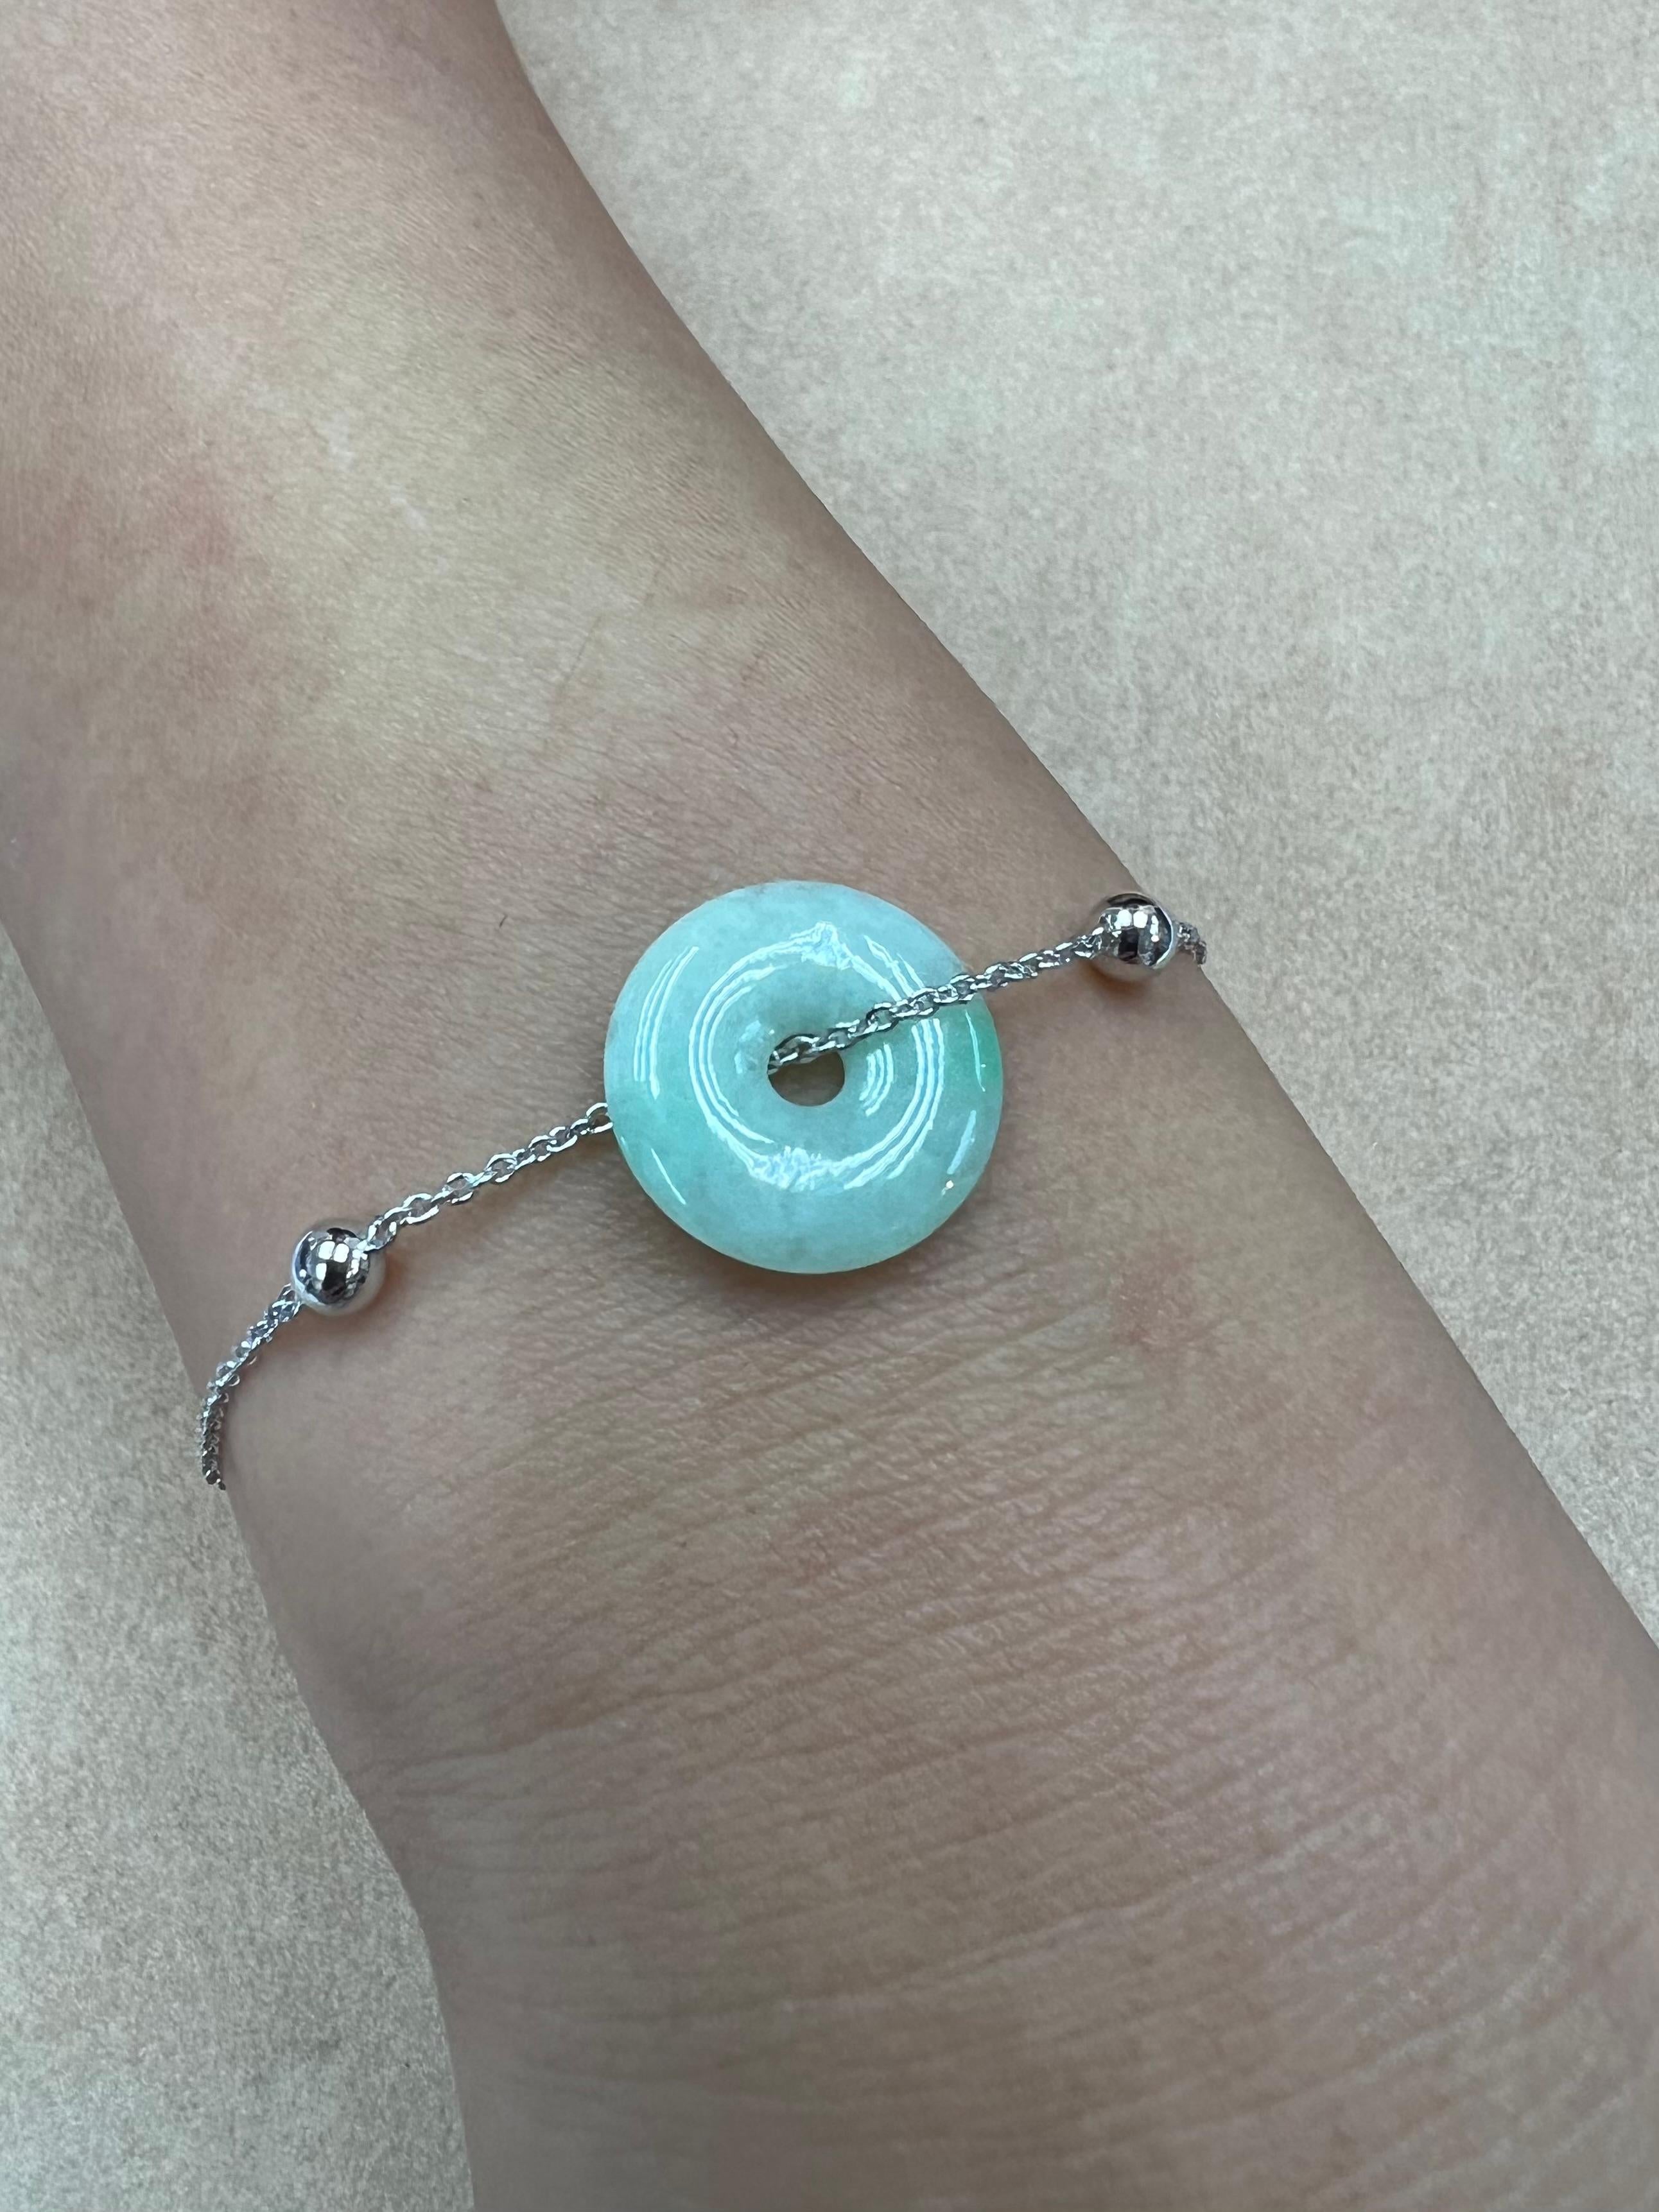 Please check out the HD video. This is certified natural jadeite jade. The bracelet is set in 18k white gold. The jade donut (6.94cts) is light green with patches of bright apple green. The untreated / un-enhanced natural jade in this bracelet is